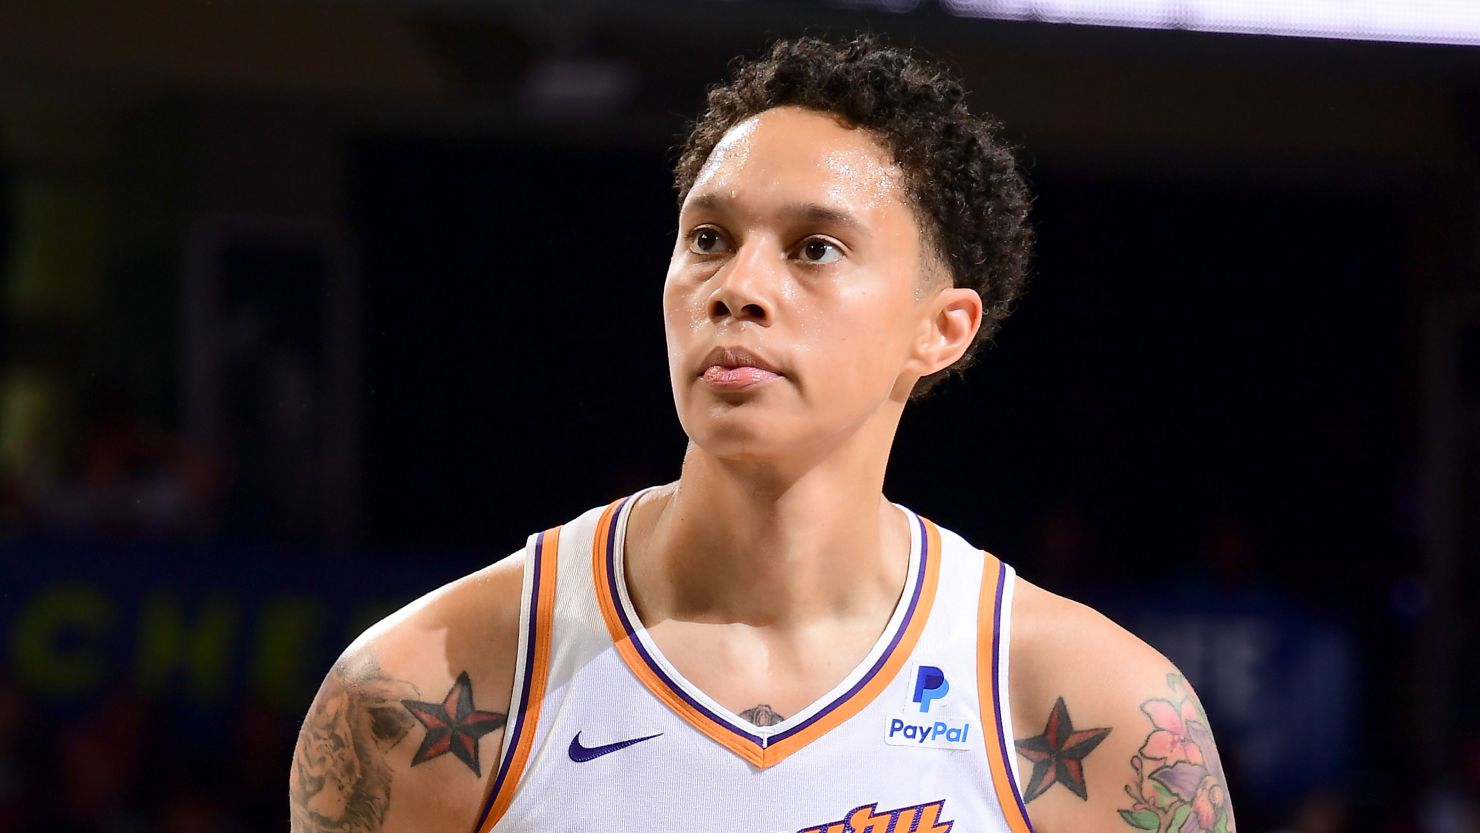 Brittney Griner of the Phoenix Mercury shoots a free throw during the game against the Dallas Wings on June 9, 2023 at the College Park Center in Arlington, Texas.